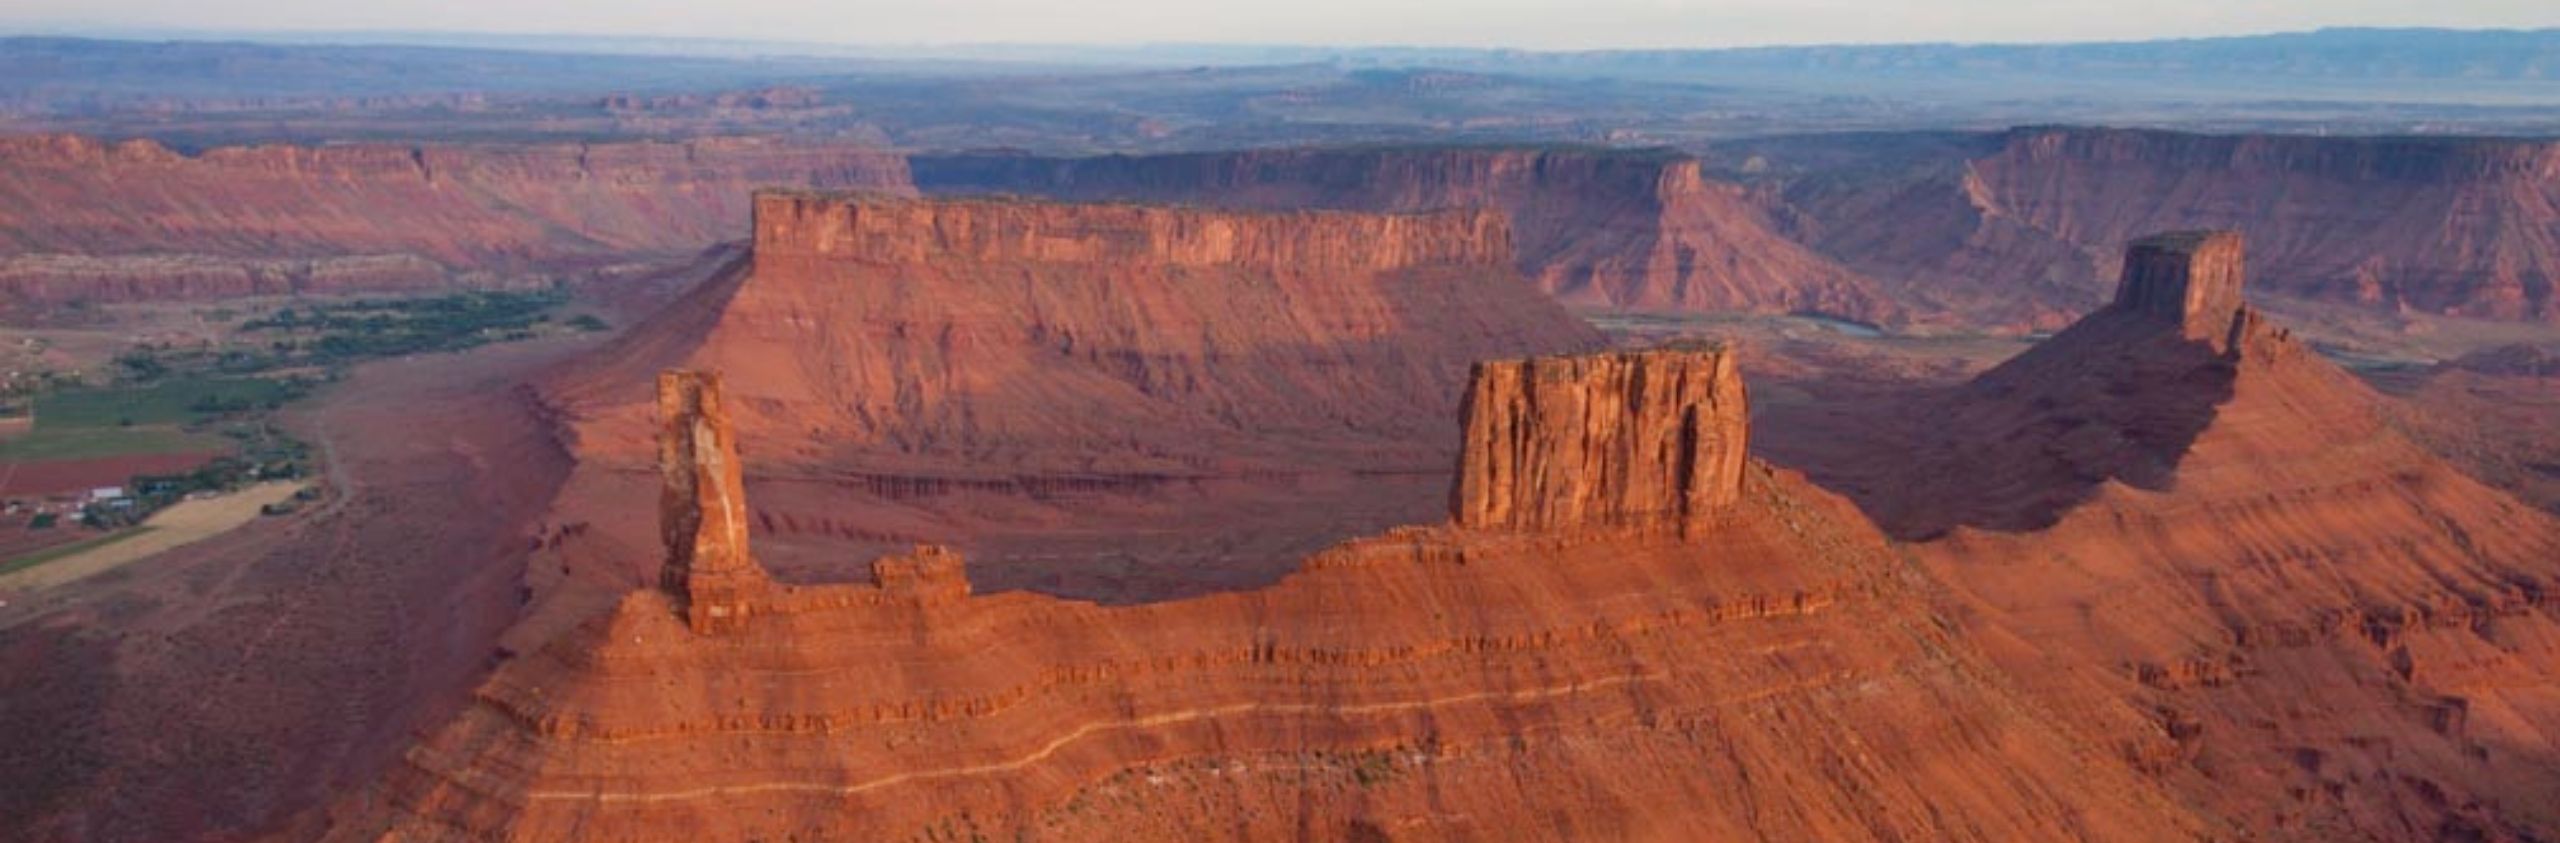 aerial view of red rocky towers in canyonlands national park